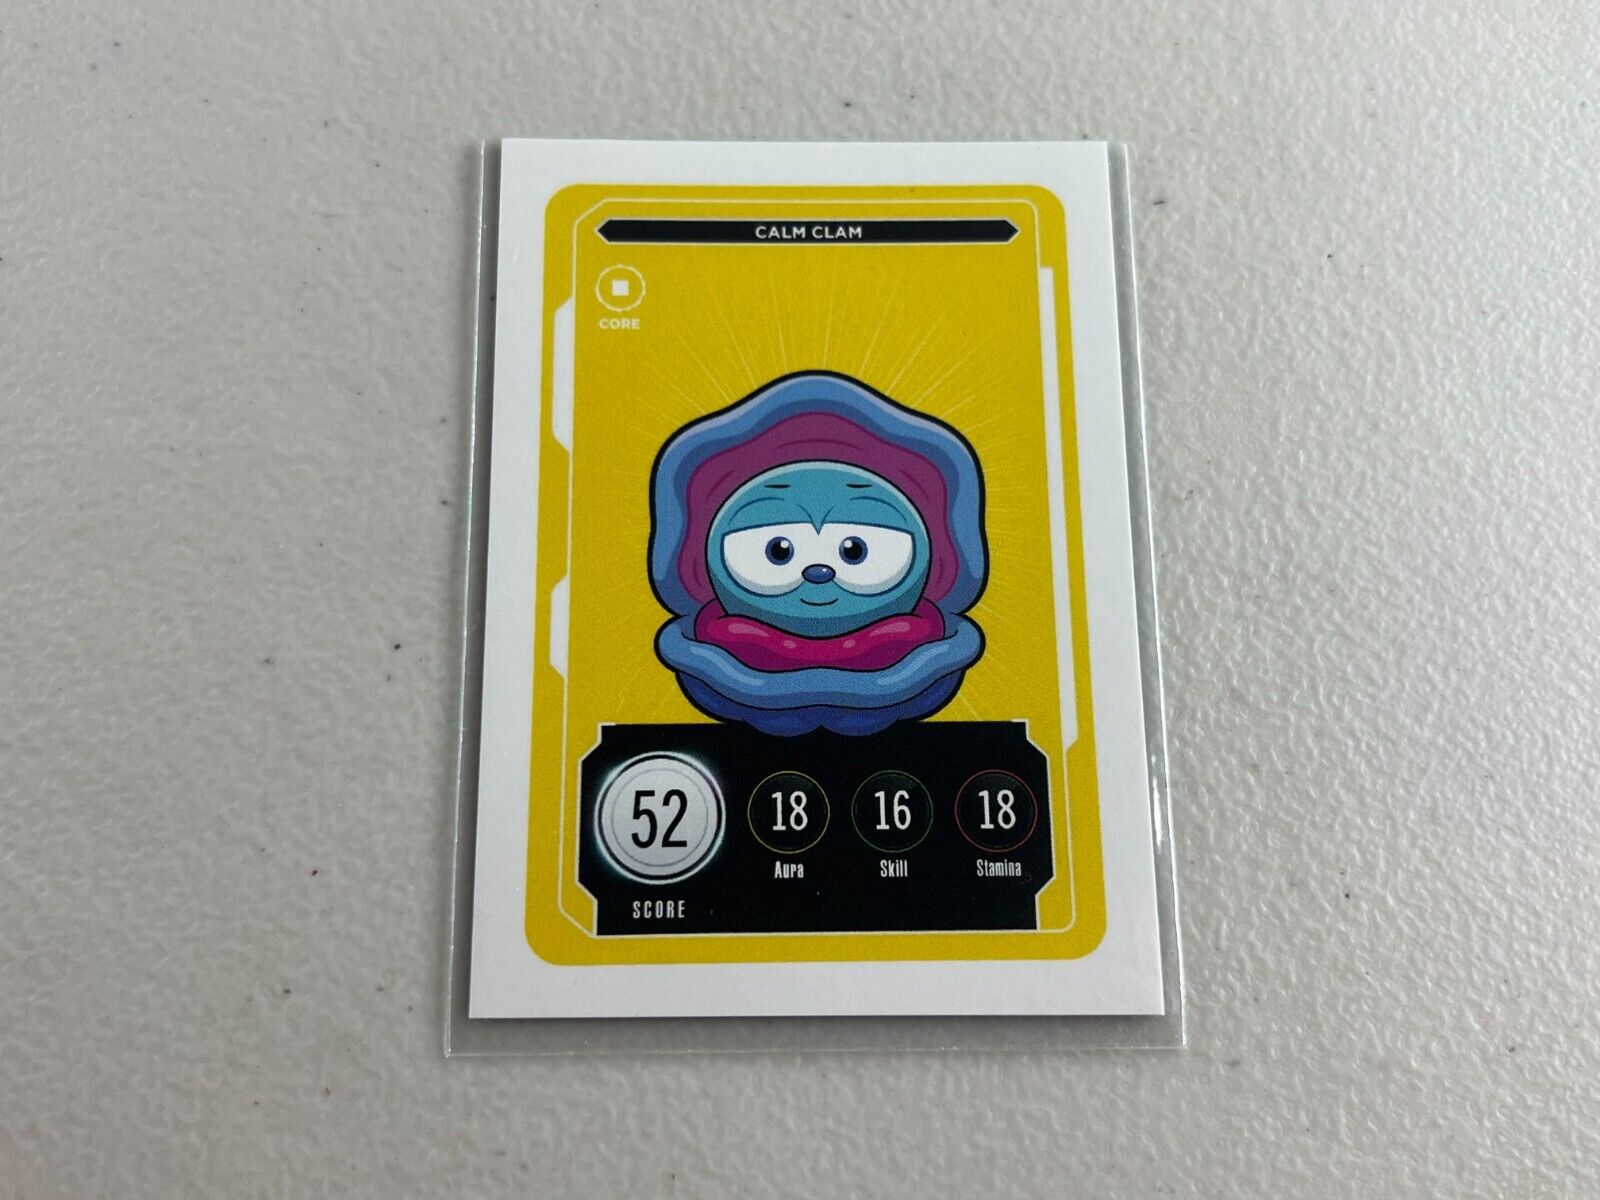 VeeFriends Calm Clam  Series 2 Compete and Collect Core Card Gary Vee